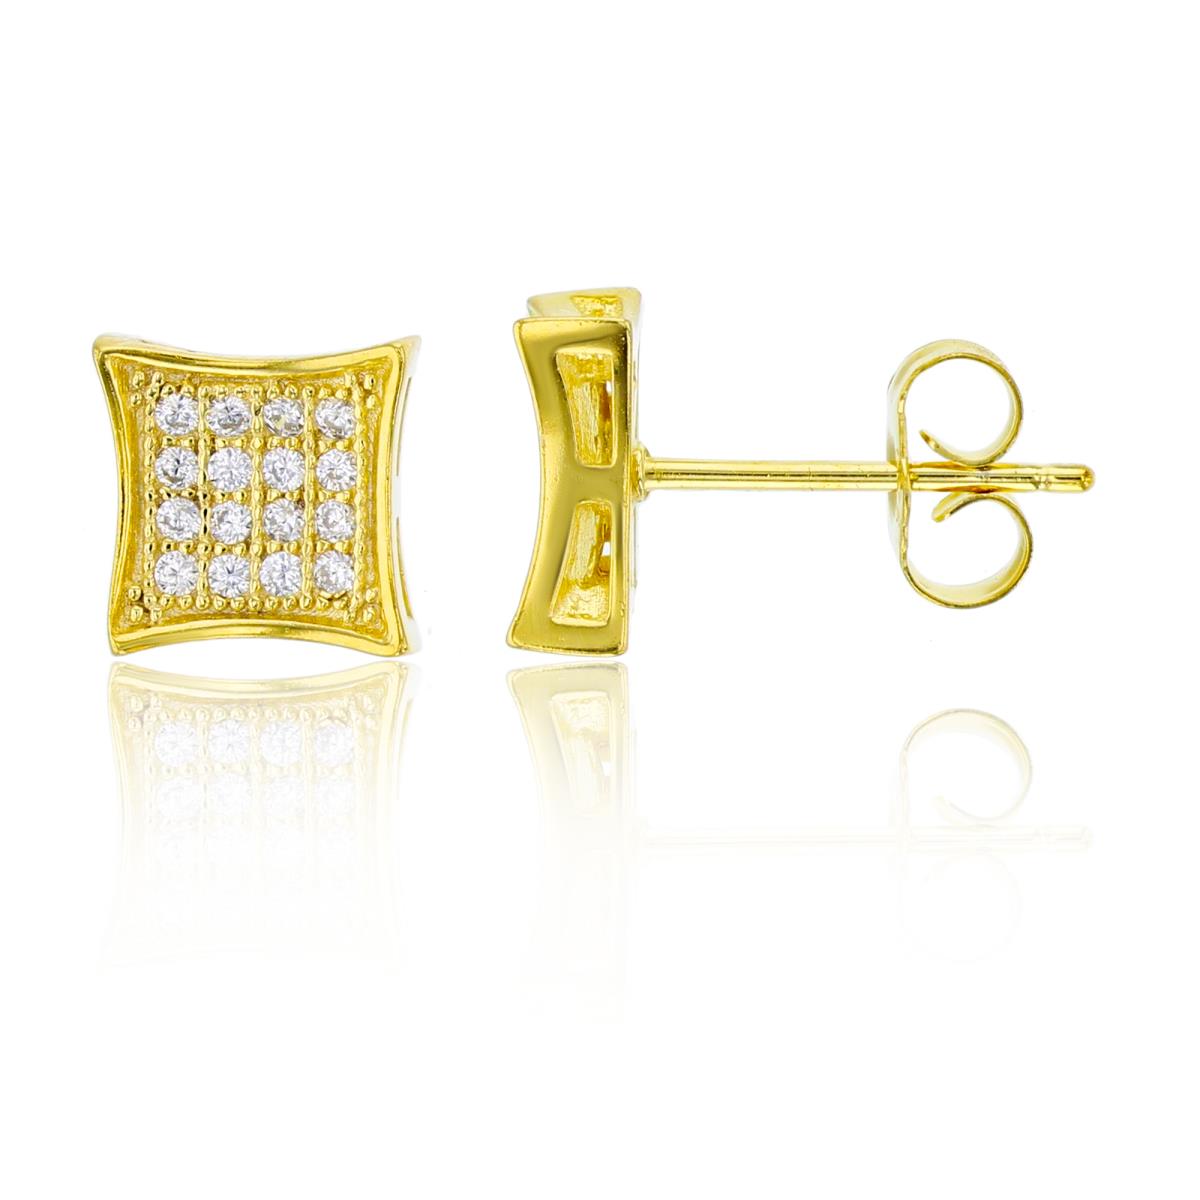 Sterling Silver Yellow 4x4mm Pave Curved Square Stud Earring